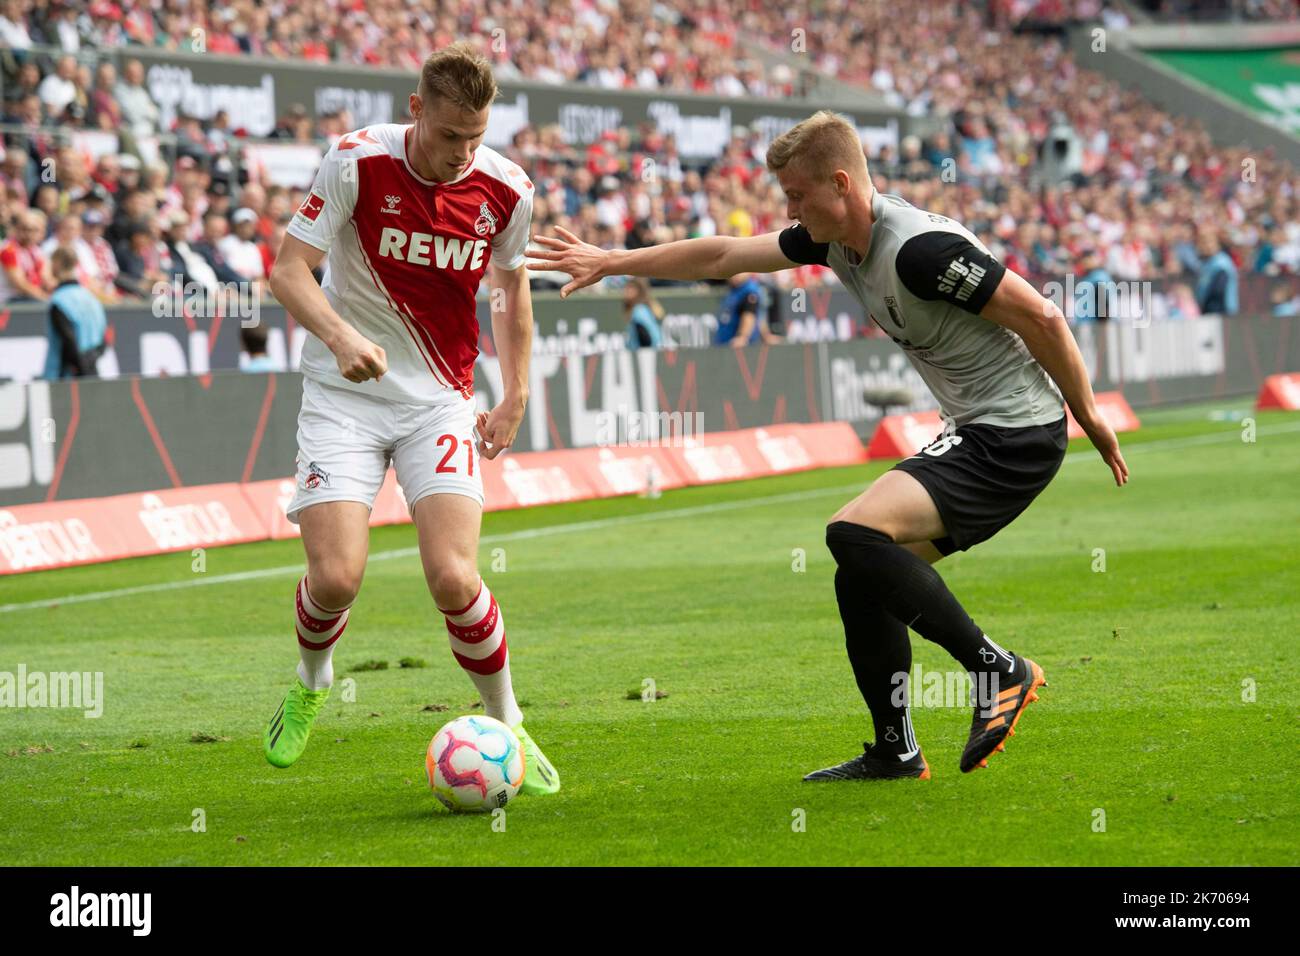 Steffen TIGGES (K) versus Frederik WINTHER (A), action, duels, soccer 1st Bundesliga, 10th matchday, FC Cologne (K) - FC Augsburg (A) 3: 2 on October 16th, 2022 in Koeln/ Germany. #DFL regulations prohibit any use of photographs as image sequences and/or quasi-video # © Stock Photo